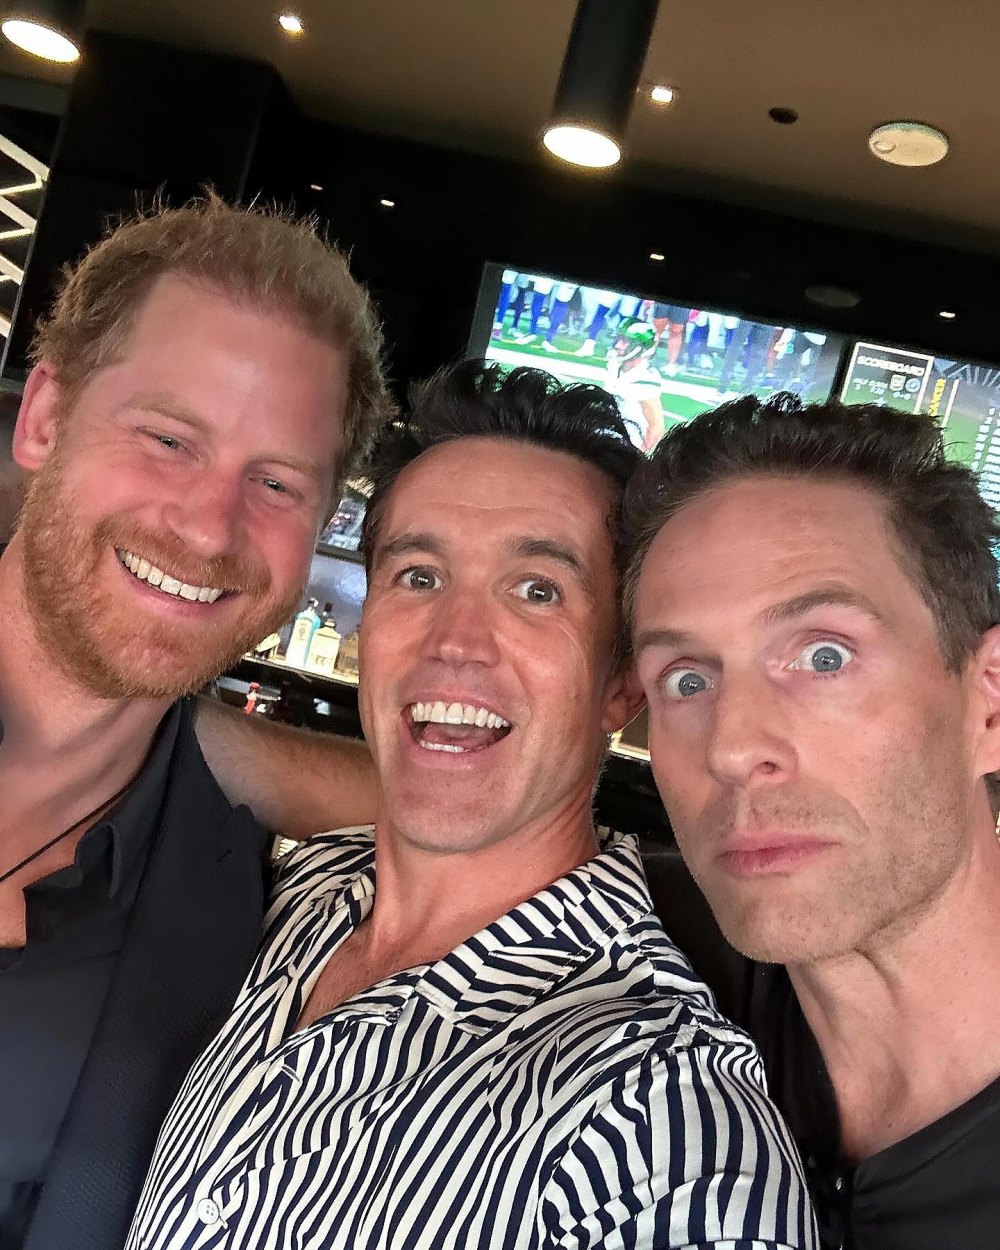 Rob McElhenney Rounds Out 2023 By Sharing Unseen Selfie With Prince Harry